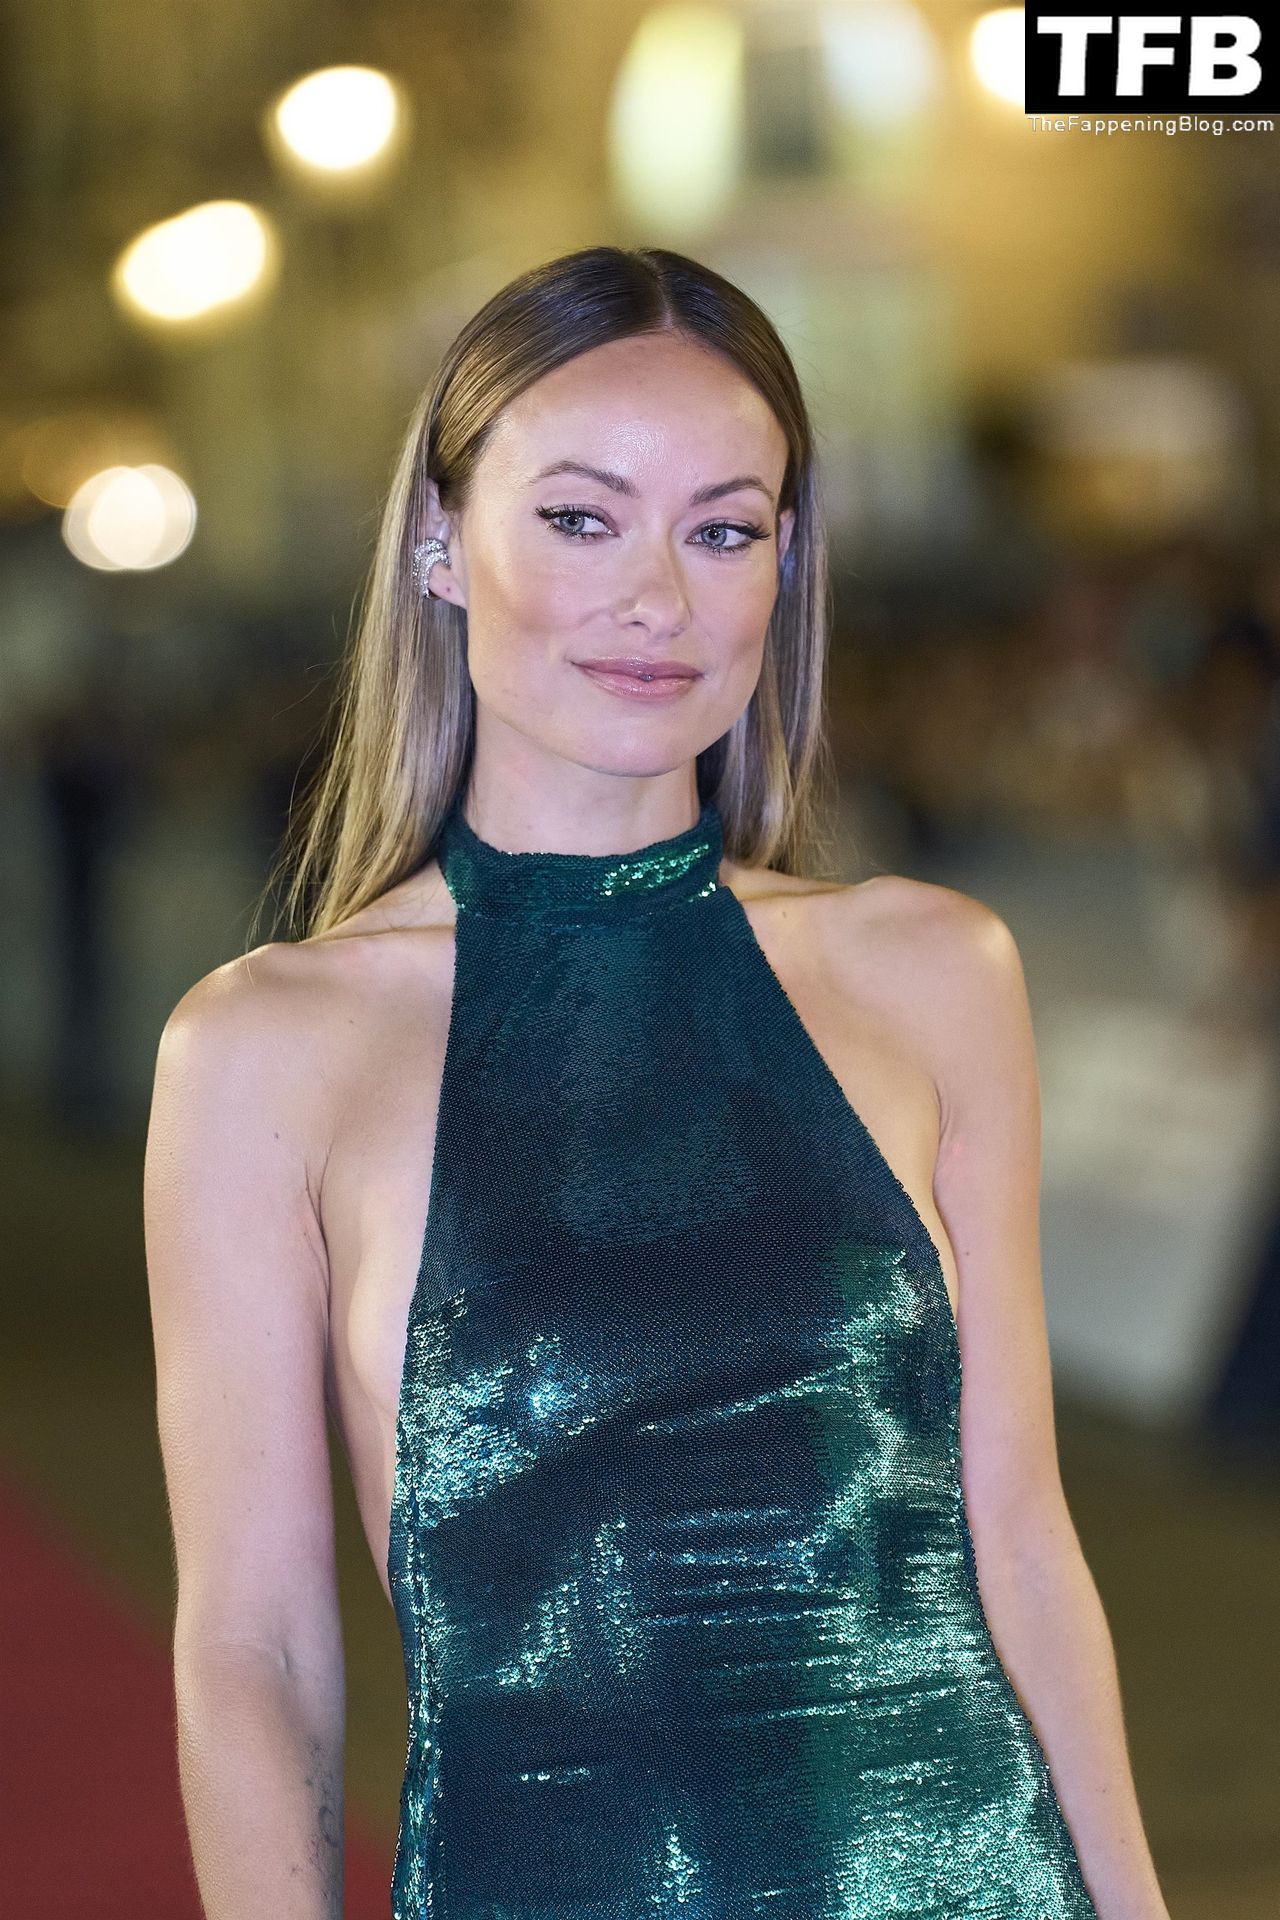 Olivia-Wilde-Sexy-The-Fappening-Blog-8.jpg